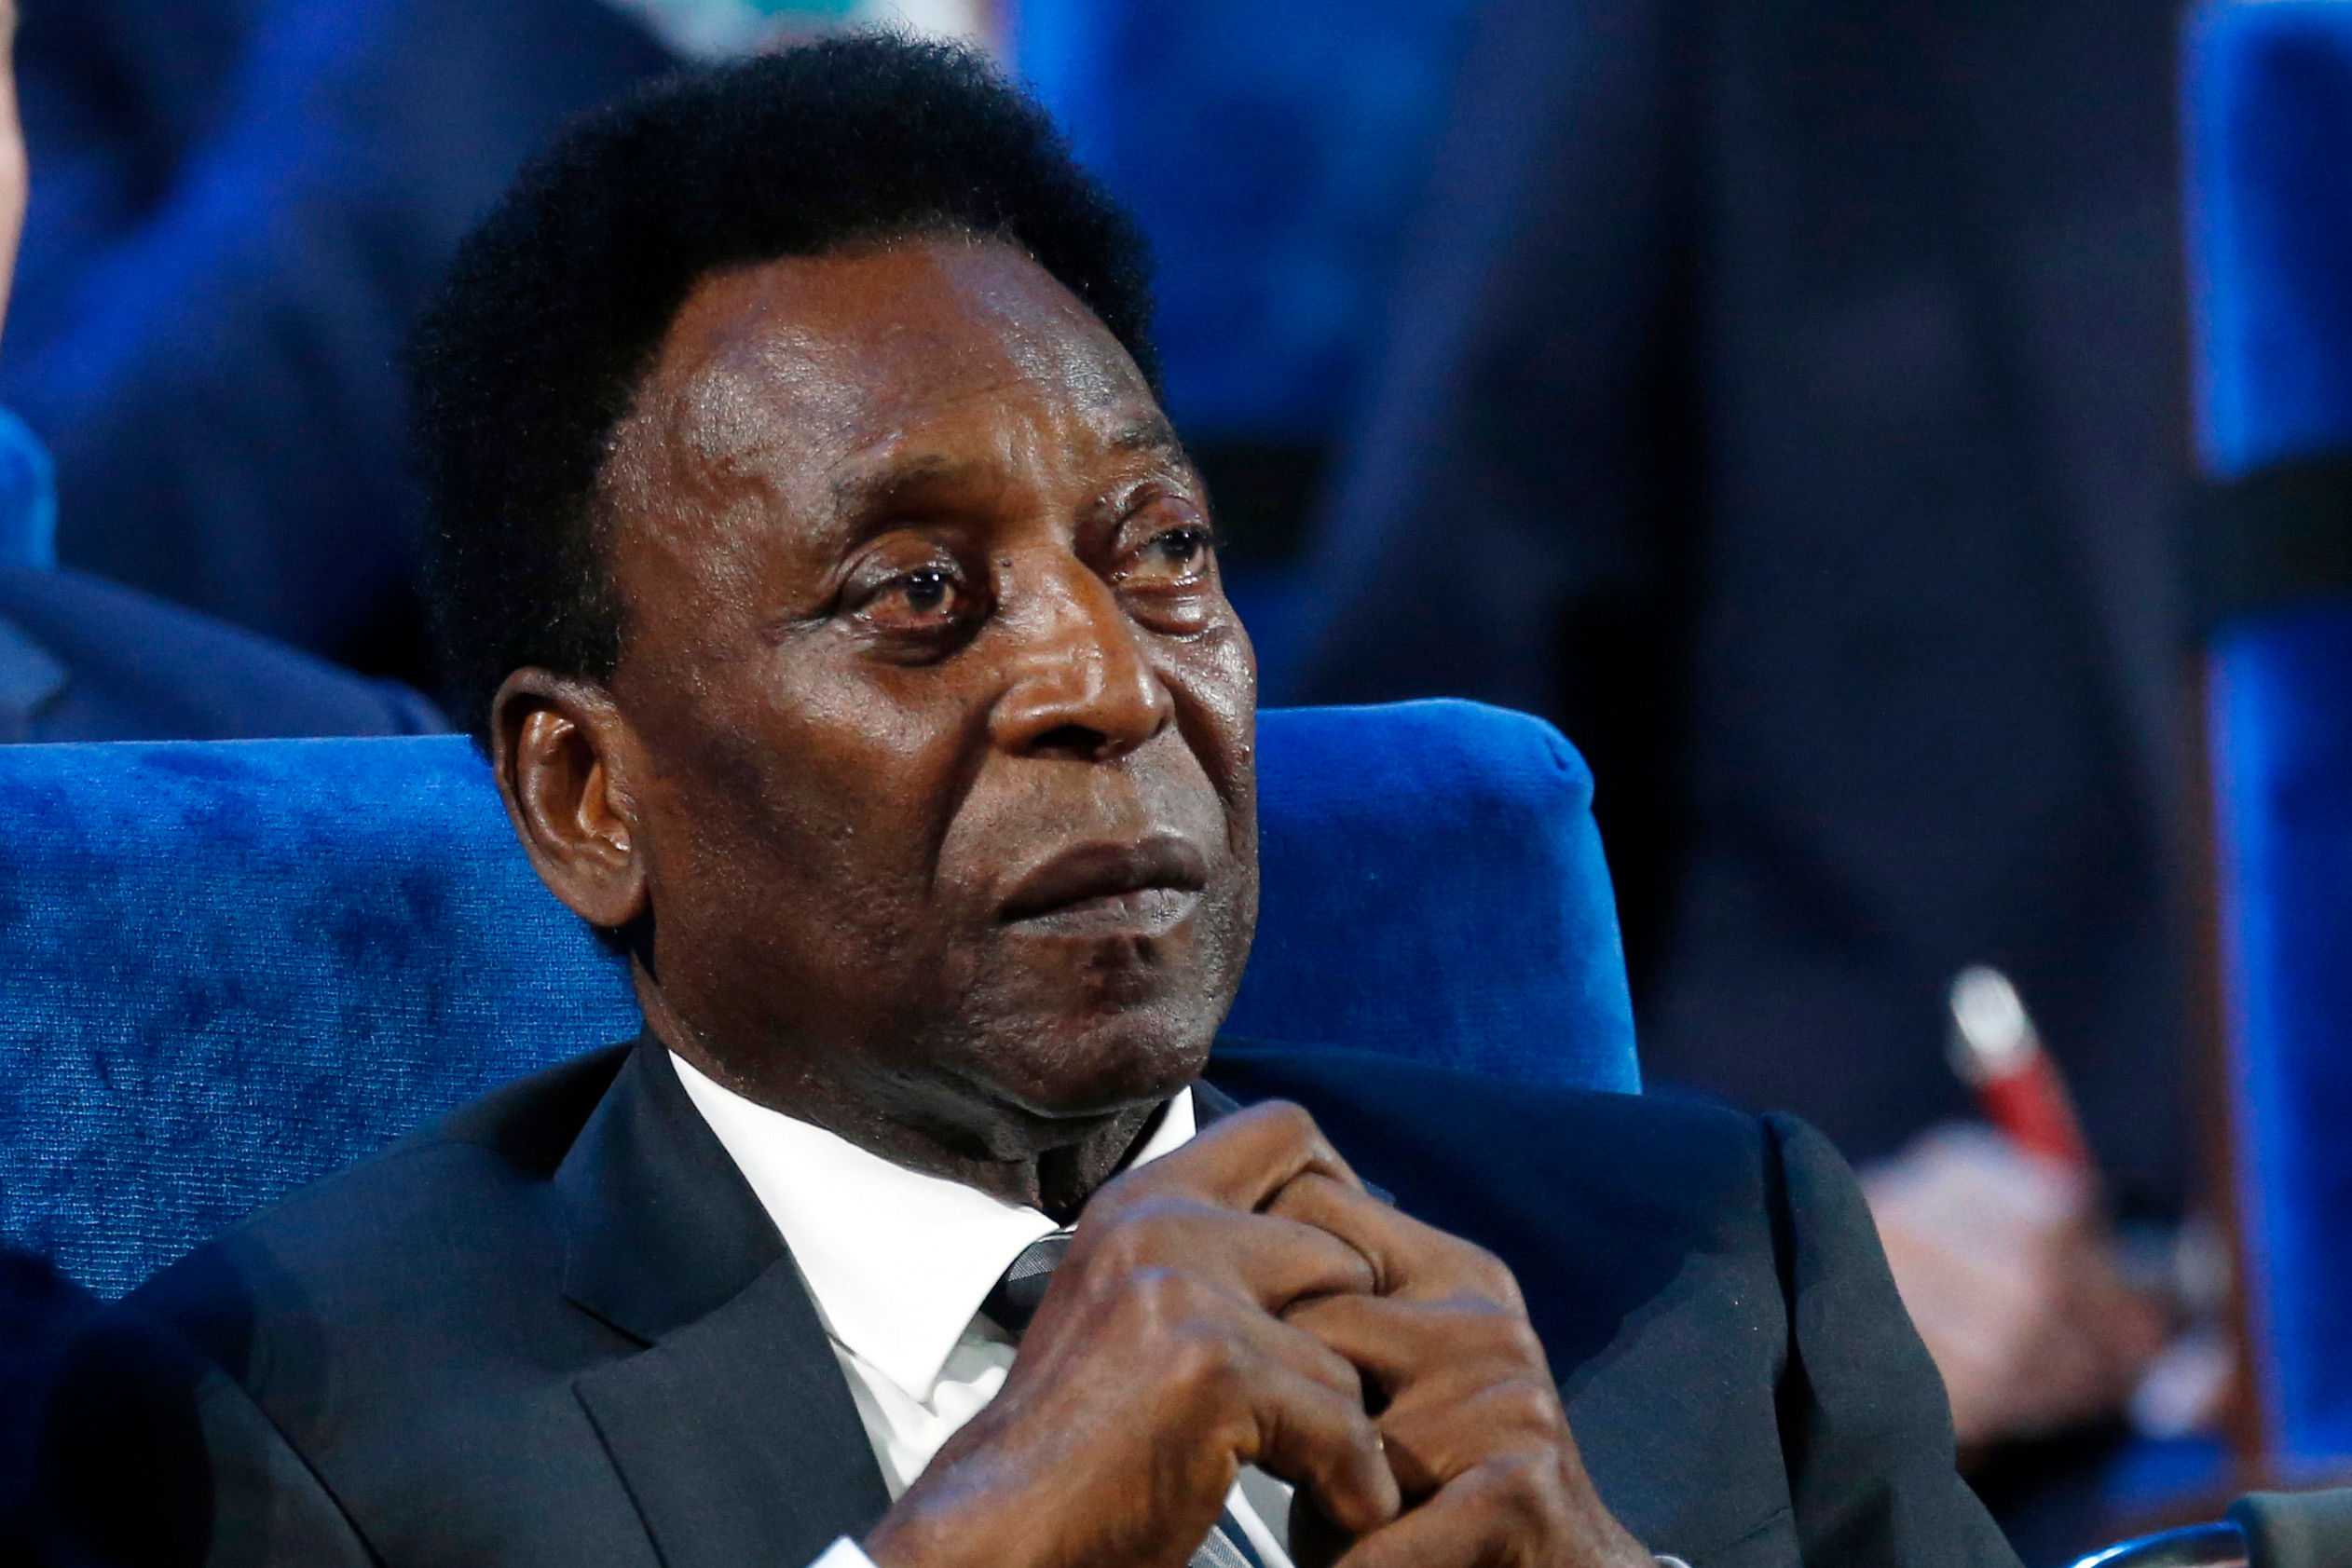 Pele says he is feeling strong, reassures fans of health in social media post